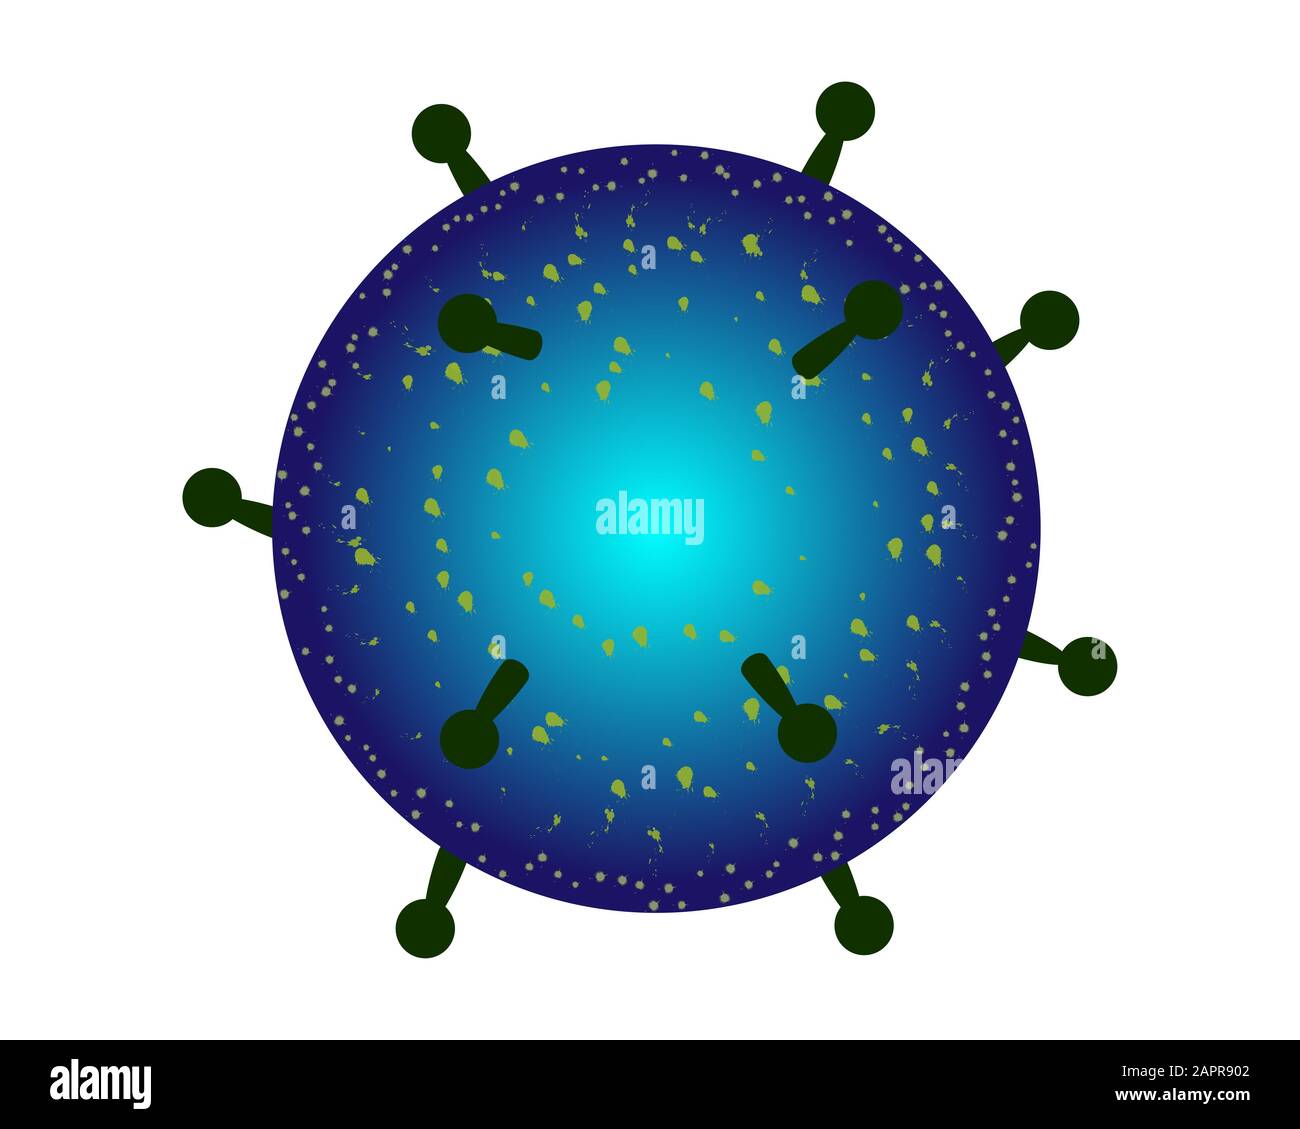 New species of corona virus Spread in a blue circle On a white background Stock Photo